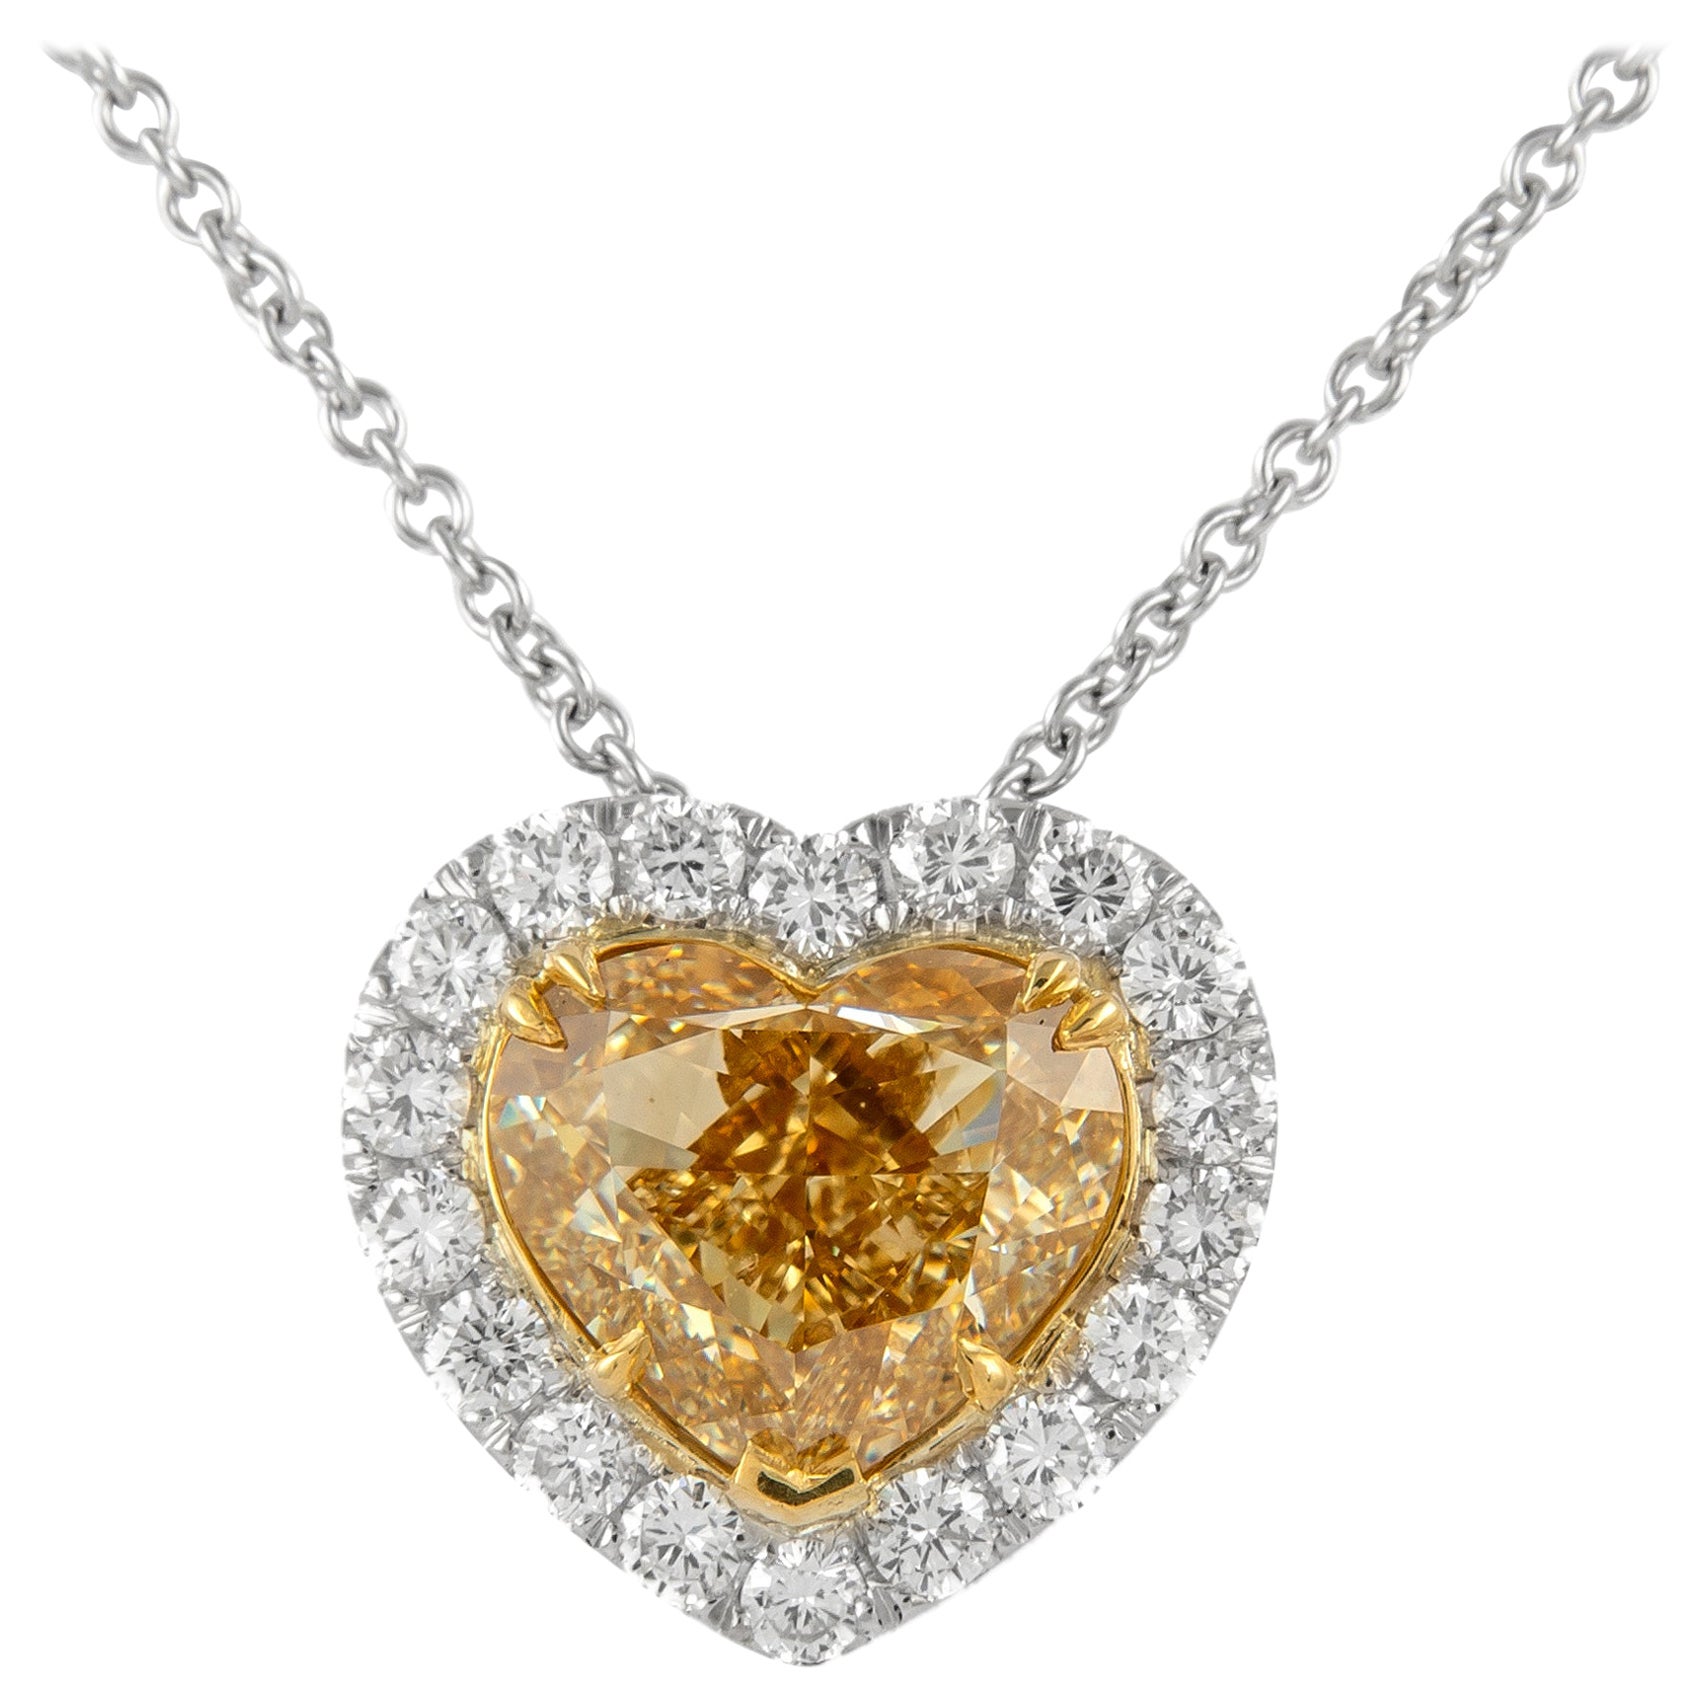 Alexander GIA 6.24ct Heart Champagne Yellow Diamond 18k Pendant Necklace For Sale